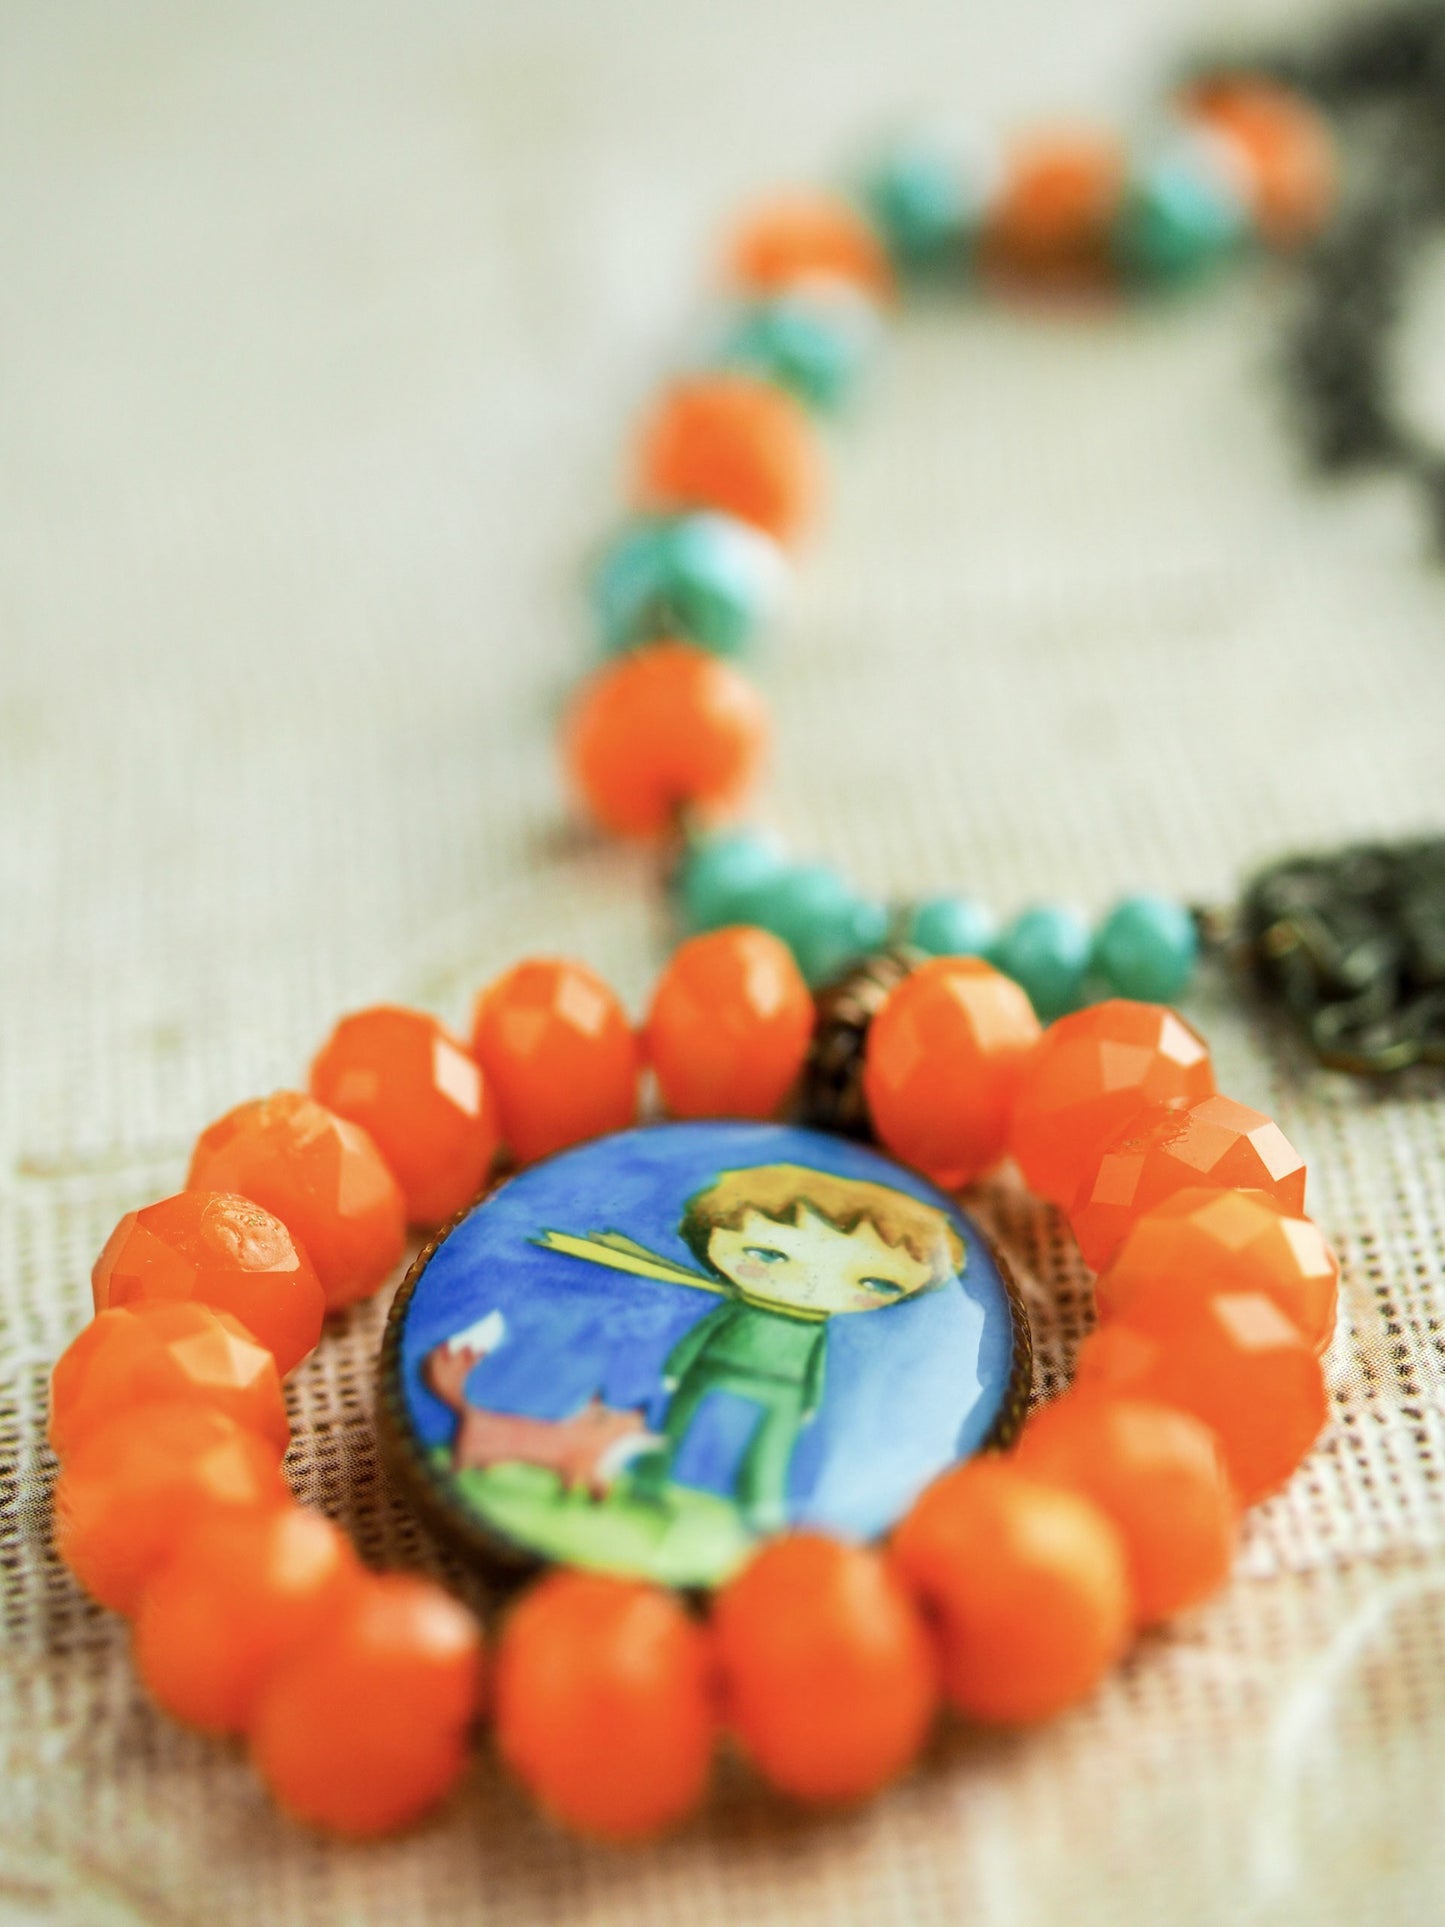 The little prince lives in this handcrafted necklace. Hand made by the talented mixed media artist, Danita.